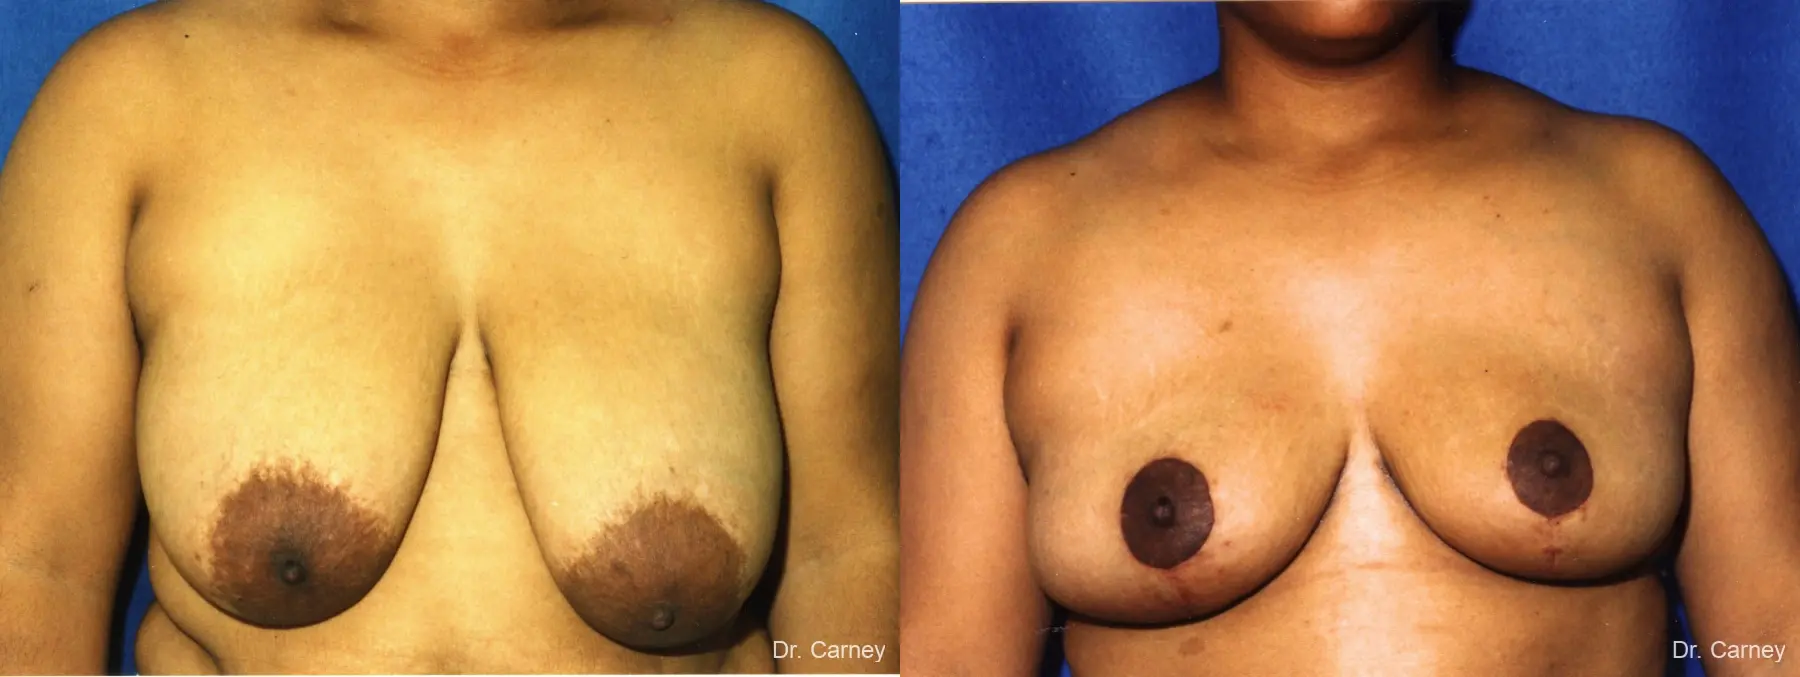 Virginia Beach Breast Reduction 1231 - Before and After 1